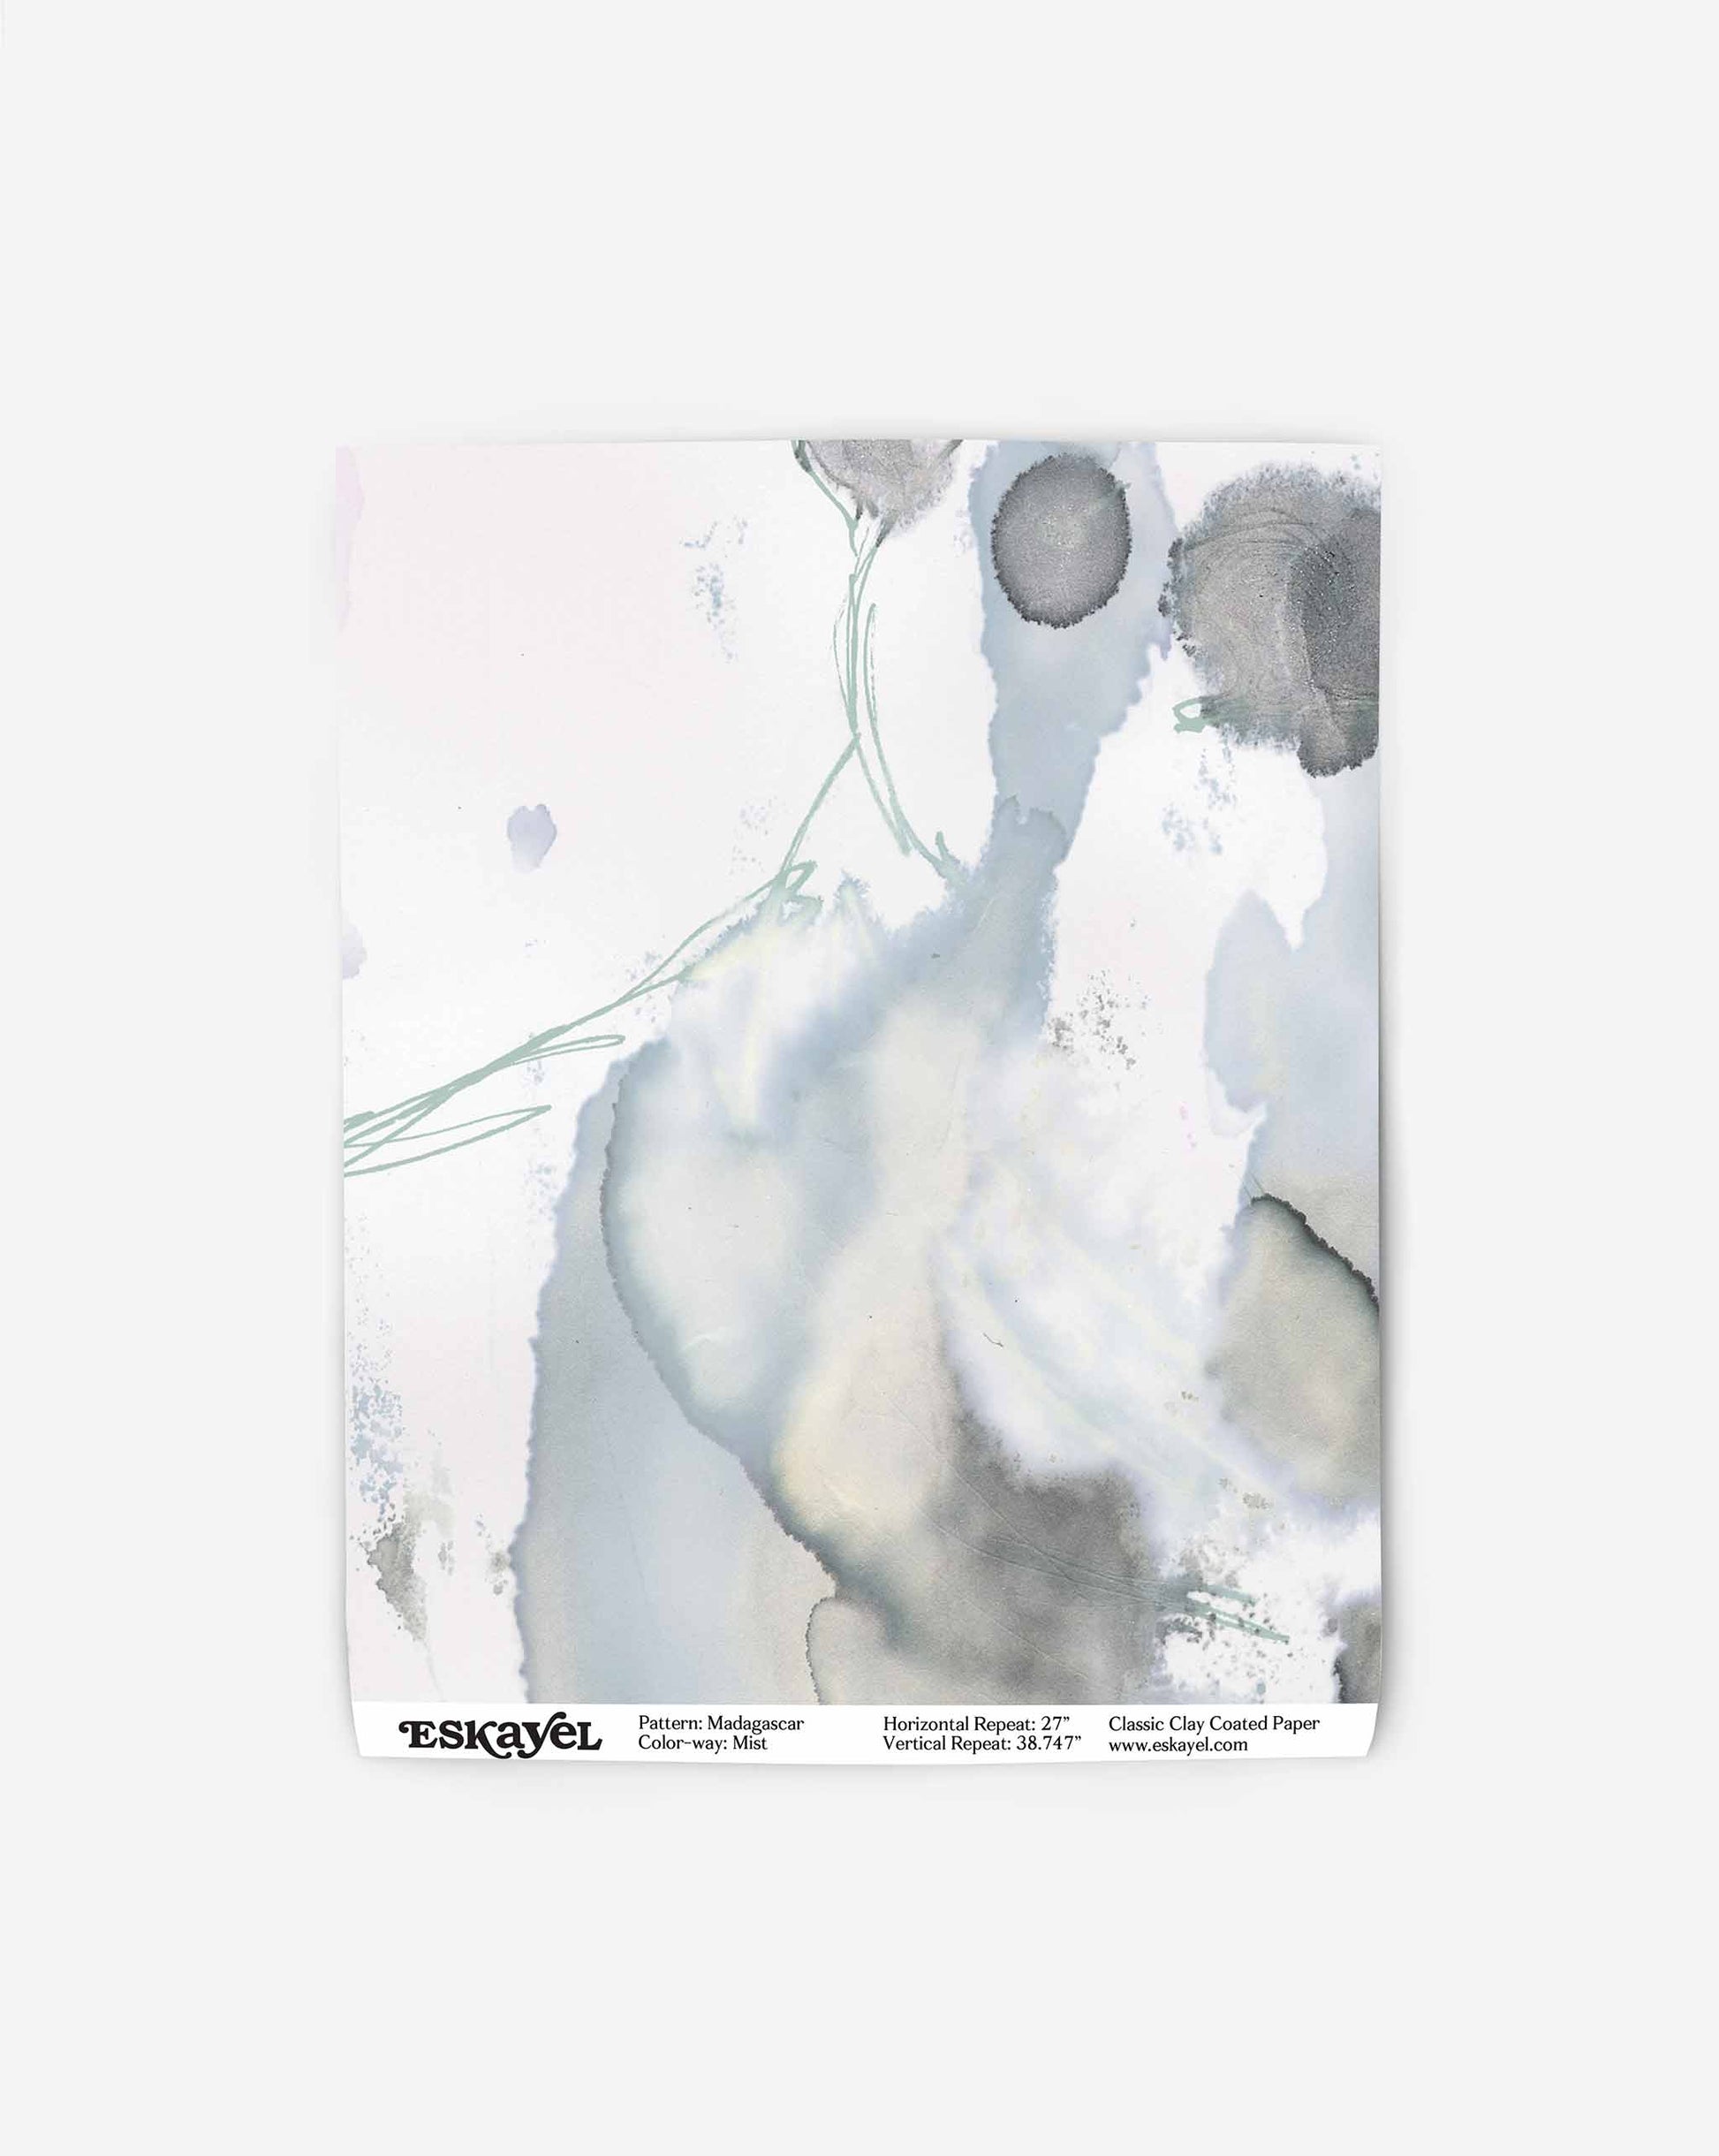 Abstract watercolor painting with shades of gray, blue, and green, featuring organic shapes and fluid patterns, set against a white background. Resembling high-end wallpaper designs, text at the bottom includes brand and product details: Madagascar Wallpaper||Mist.